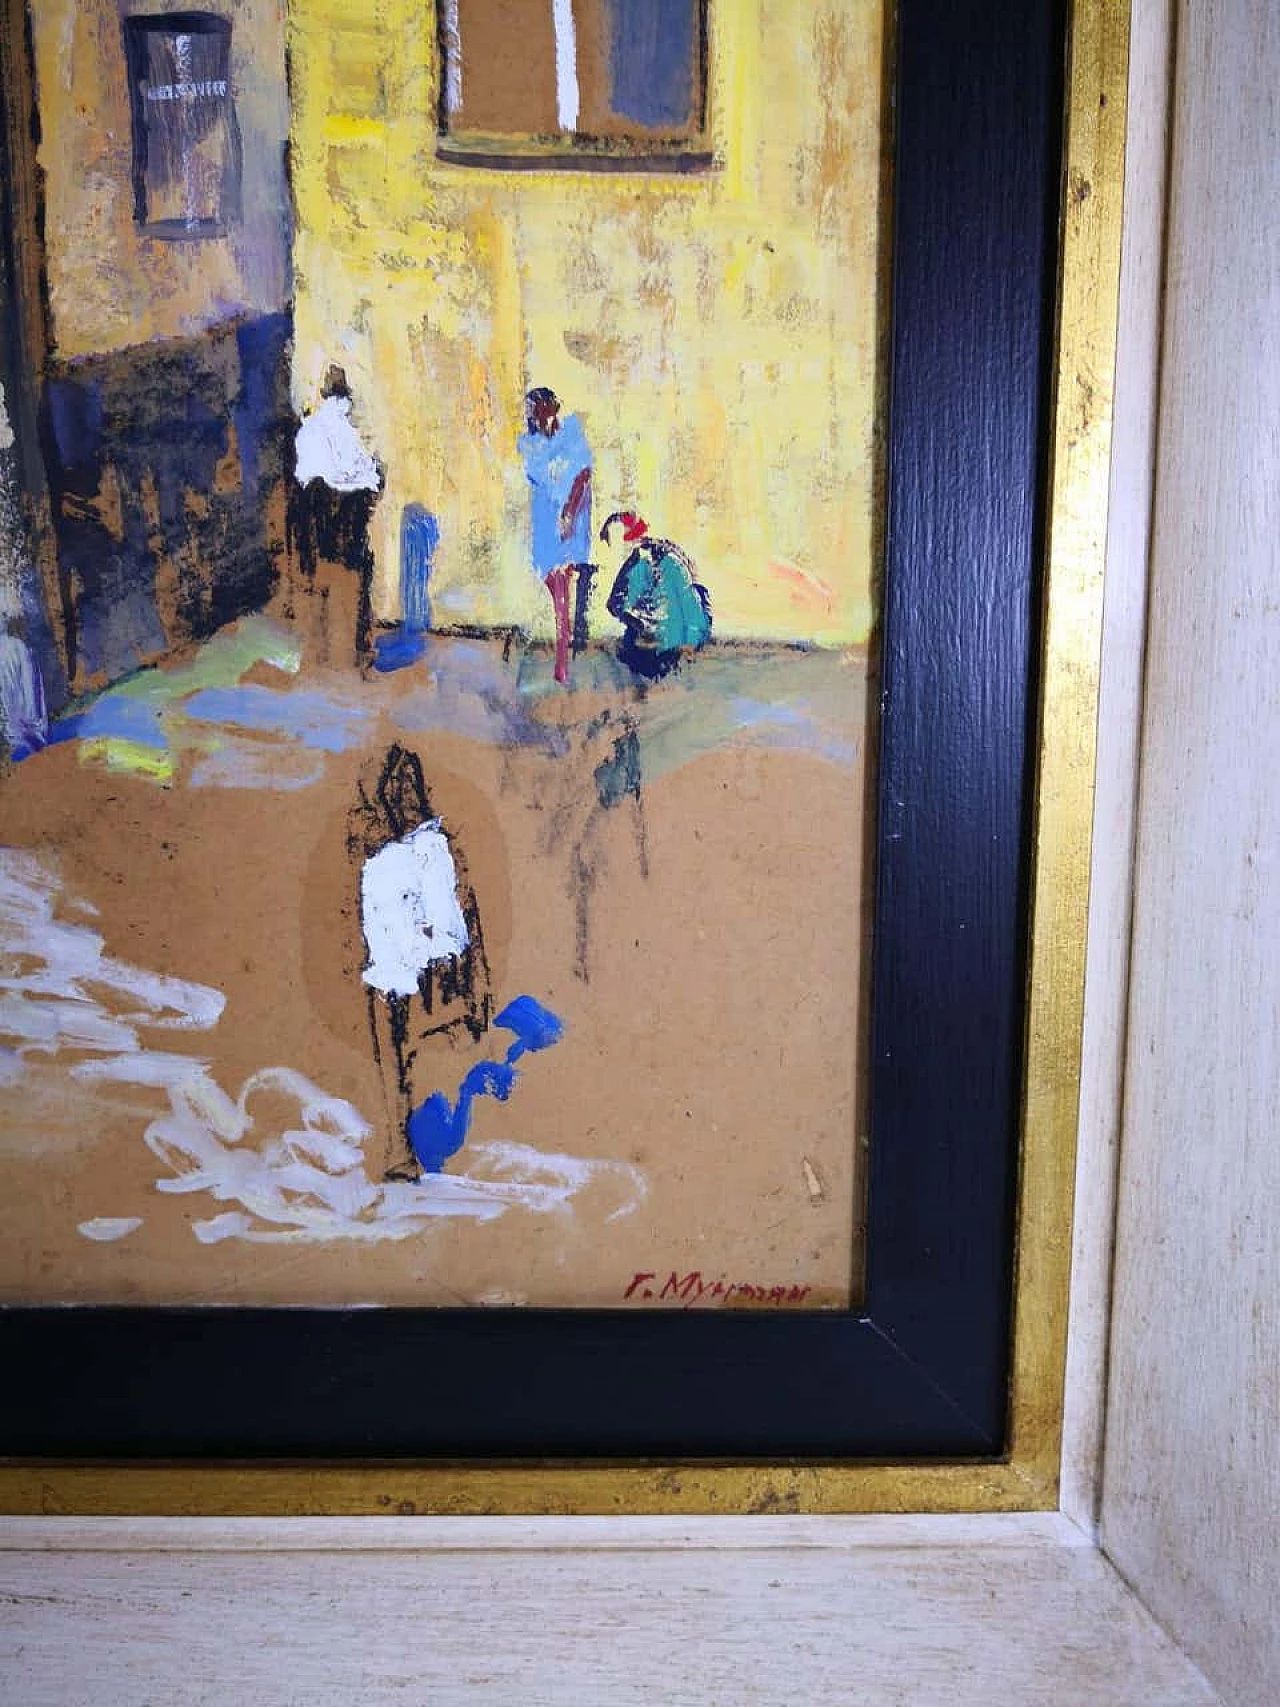 Oil painting In the yard by Munteanu Gheorghe, 1968 1186334